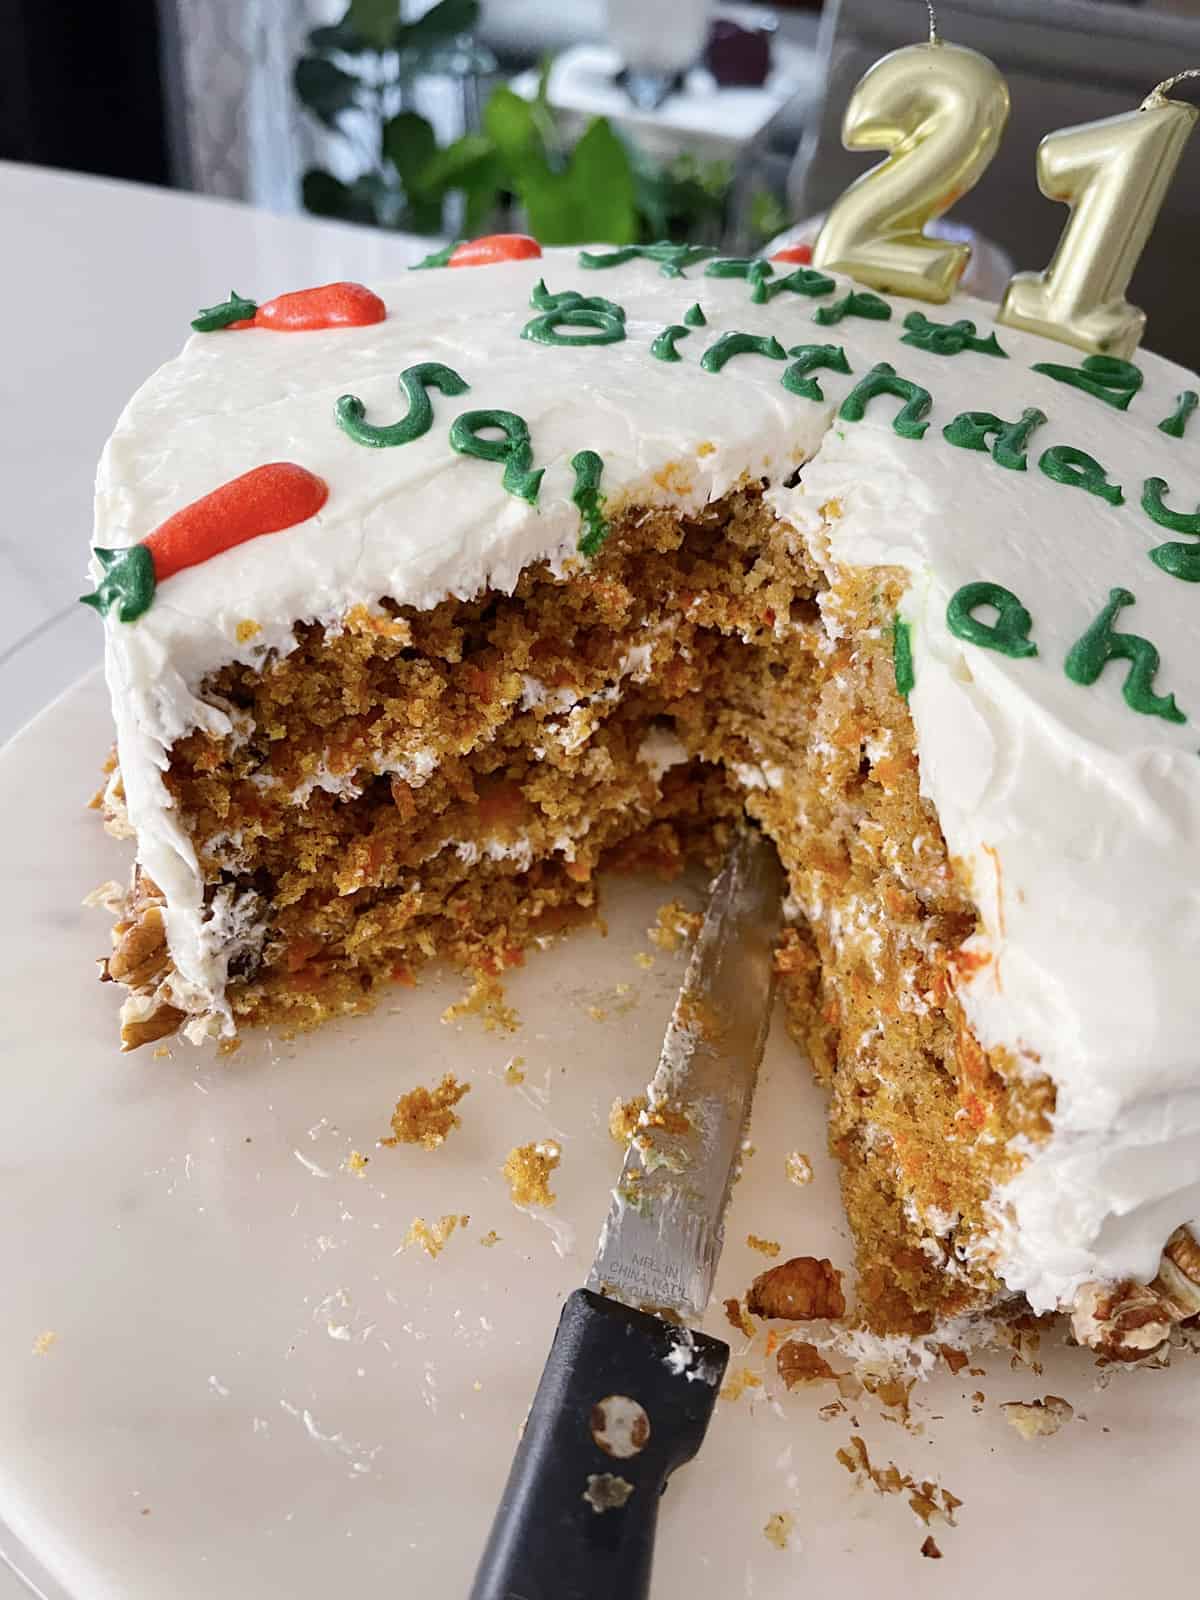 Carrot cake with several slices already cut out of it.